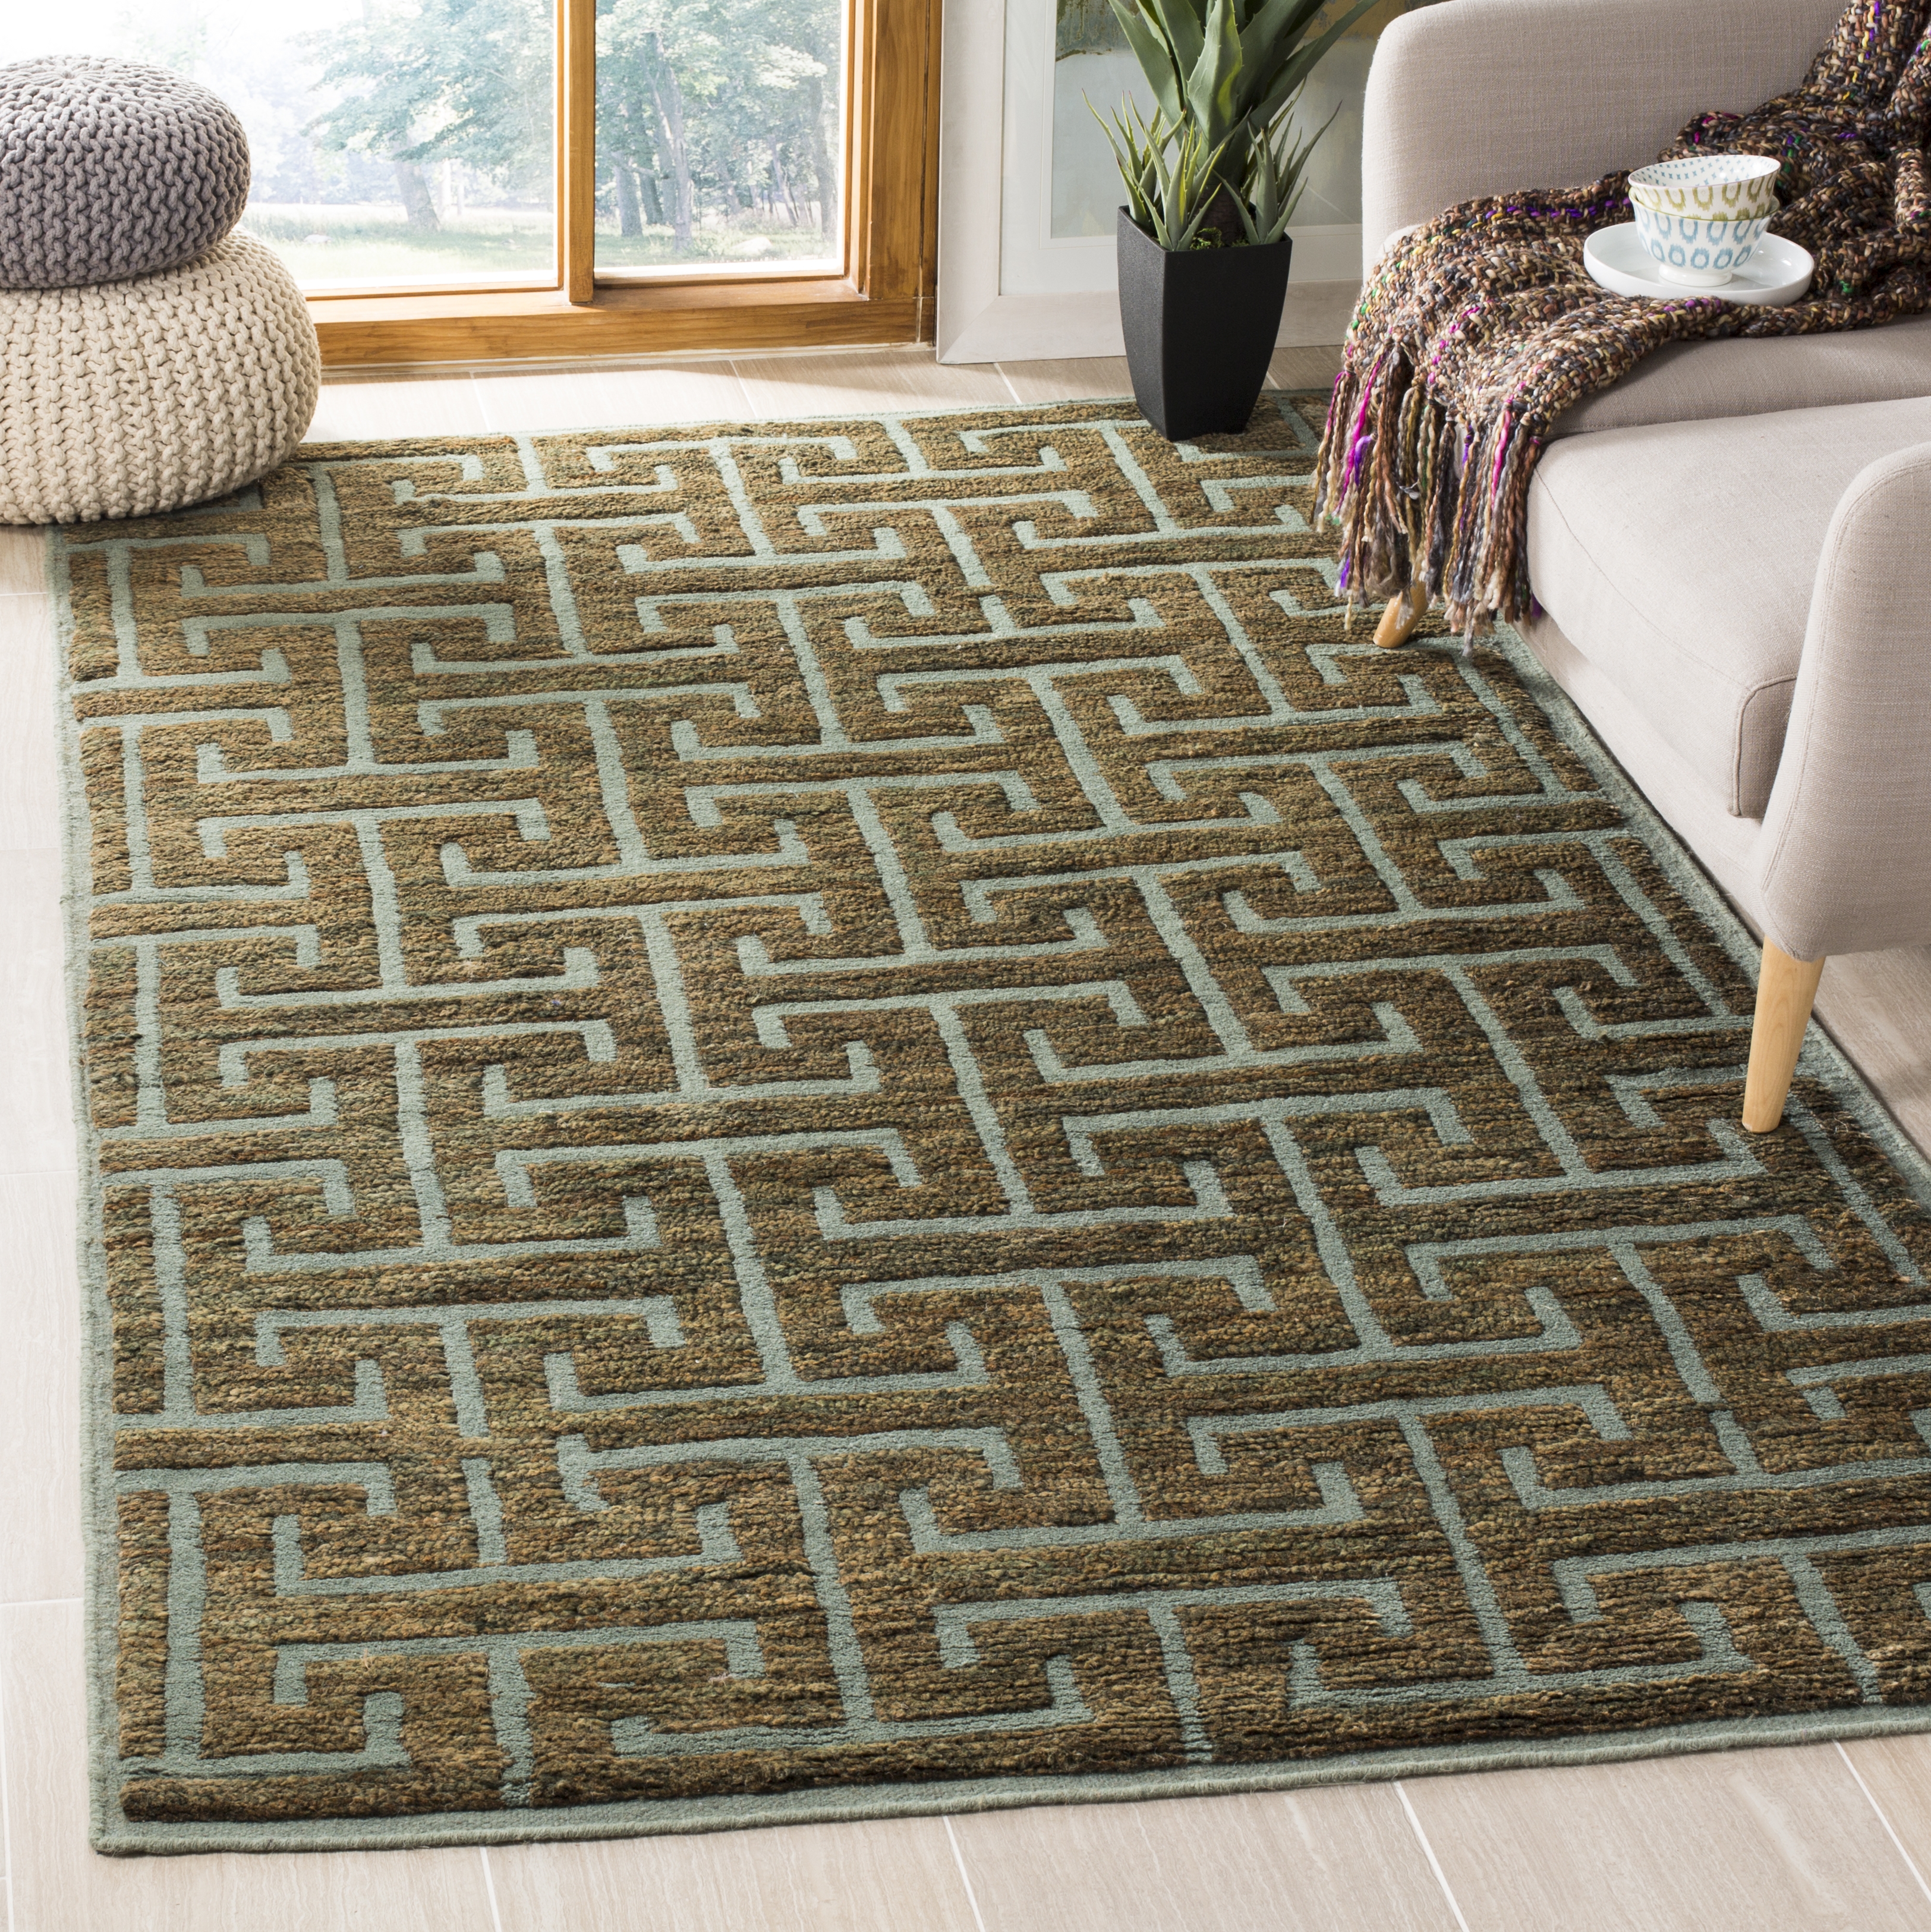 Arlo Home Hand Knotted Area Rug, TGR417D, Blue/Beige,  4' X 6' - Image 1